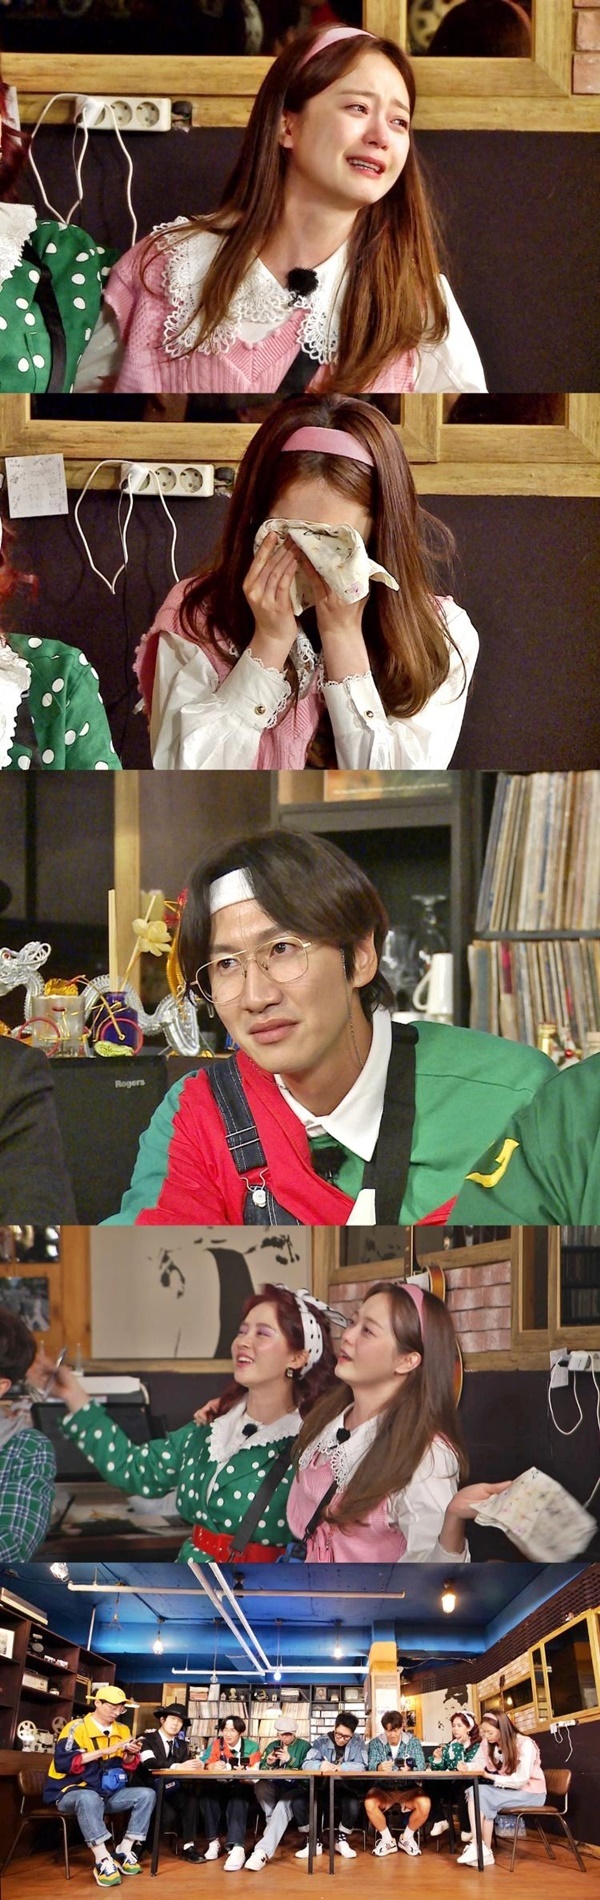 Jeon So-min of Running Man showed Tearsss.On SBSs Running Man, which will be broadcast on the 2nd (Sun), the story of Jeon So-mins sudden Tearsss during the recording will be revealed.The first episode of 91 Iz Back, which was broadcast last week, gave great fun with eight-color retro fashion and perfect situational drama of the members who became 91 class.In particular, Haha, unlike other members, showed Michael Jackson Omaju fashion alone and became a new laughing point.This week, the members past episodes will be released, and a full-scale recall time will be held.The members conducted a mission at the LP bar where the emotions of the 90s were buried, and submitted the stories and application songs that had been hidden.When Choi Ho-seops Mask of the Year, along with Kim Jong-guks story, When I was in school, I wanted to give up my dream of a singer on the contrary of my parents, came out, all the members were soaked in memories with their hands tightly held.At this time, Jeon So-min, the representative emotional worker of Running Man, said, Its a start again.In particular, I could not speak with the lyrics Do not forget and remember, but before the story was written, Jeon Sang-min recalled the past with a faint recollection of the past, saying, Memories ... I do not write one piece ... and made the members buzz by revealing a meaningful love story with the song Have you ever drank angels and coffee?On the other hand, on this day, the story of Yang Se-chan, who had a big fire in his childhood, Lee Kwang-soo, who wants to be a good mother, and Hahas childhood, which was exceptionally introspective, attracted attention.The reason why the Love Frog Jeon So-min shed Tearsss and the members past history will be revealed at Running Man, which will air at 5 p.m. on Sunday the 2nd.photoSBS